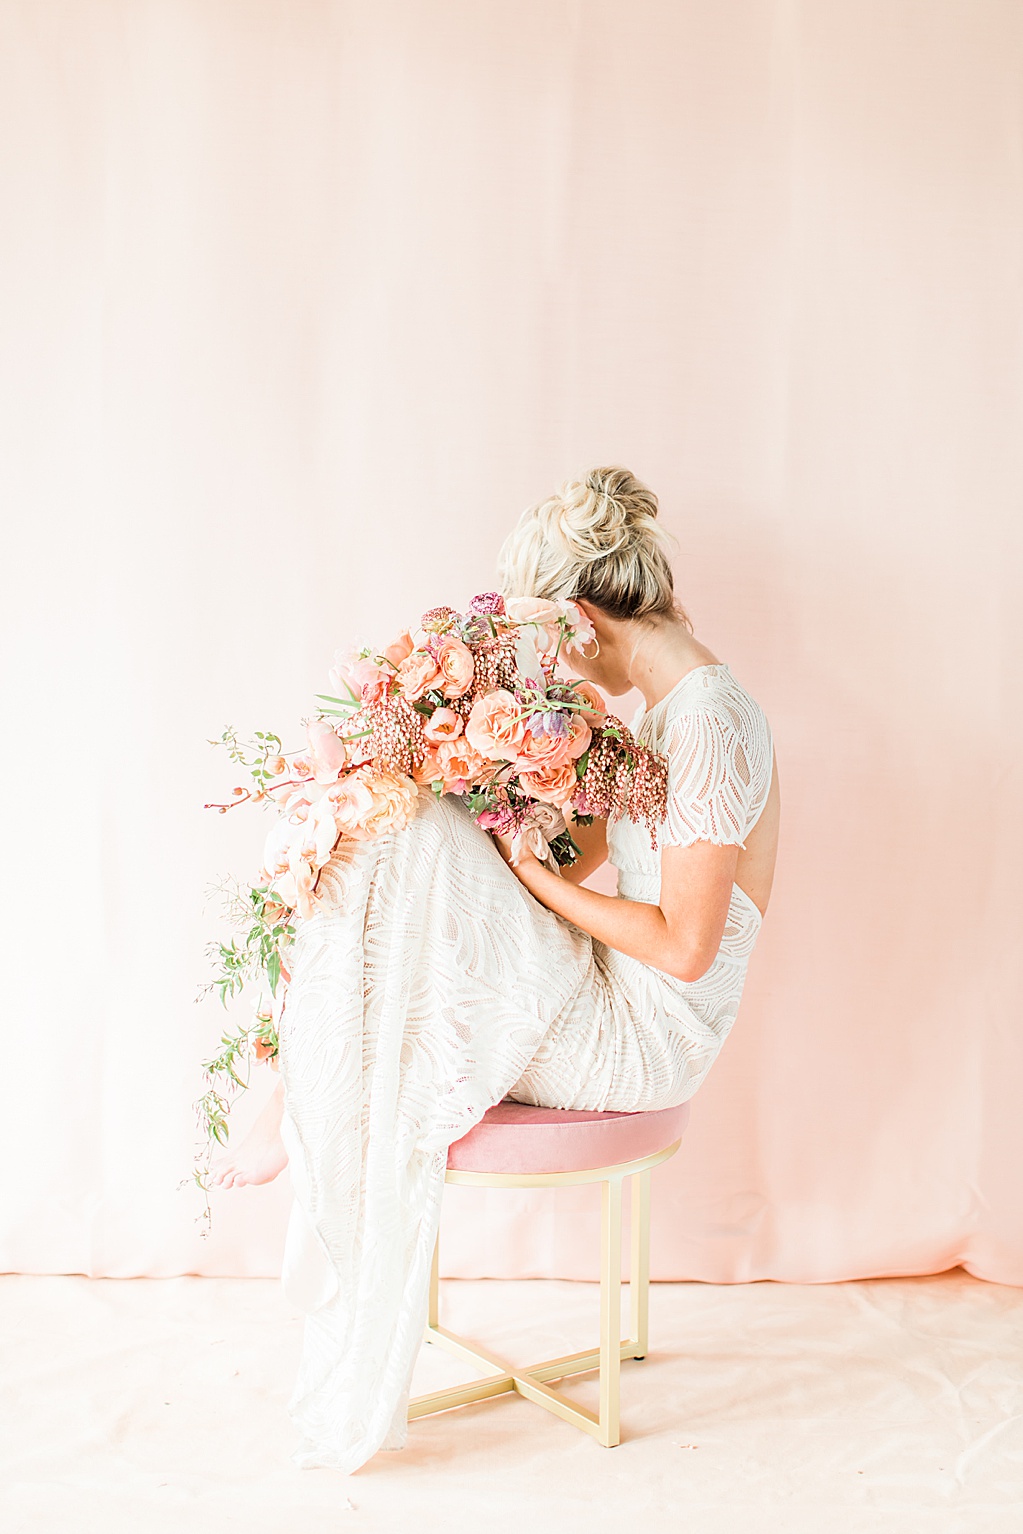 Blush mauve peach and coral wedding inspiration at Prospect House in Dripping Springs Texas wedding venue by Allison Jeffers Photography 0029